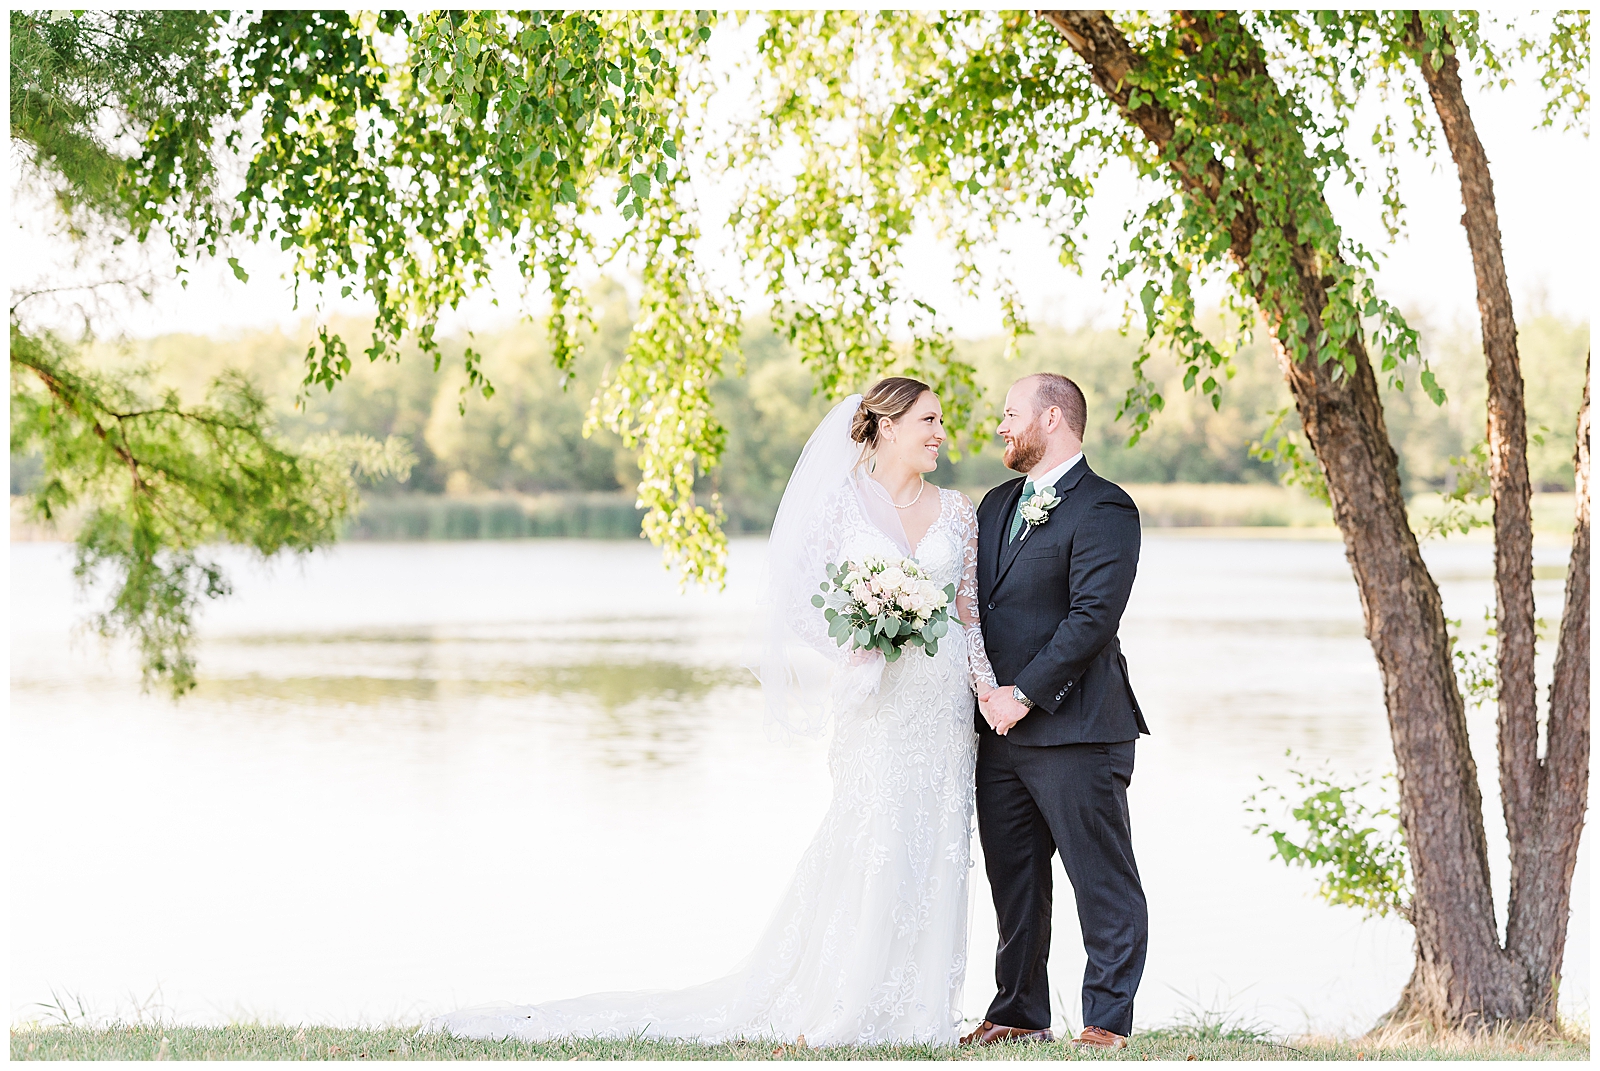 Sunset wedding portraits at Kemper Lakes Golf Course in IL